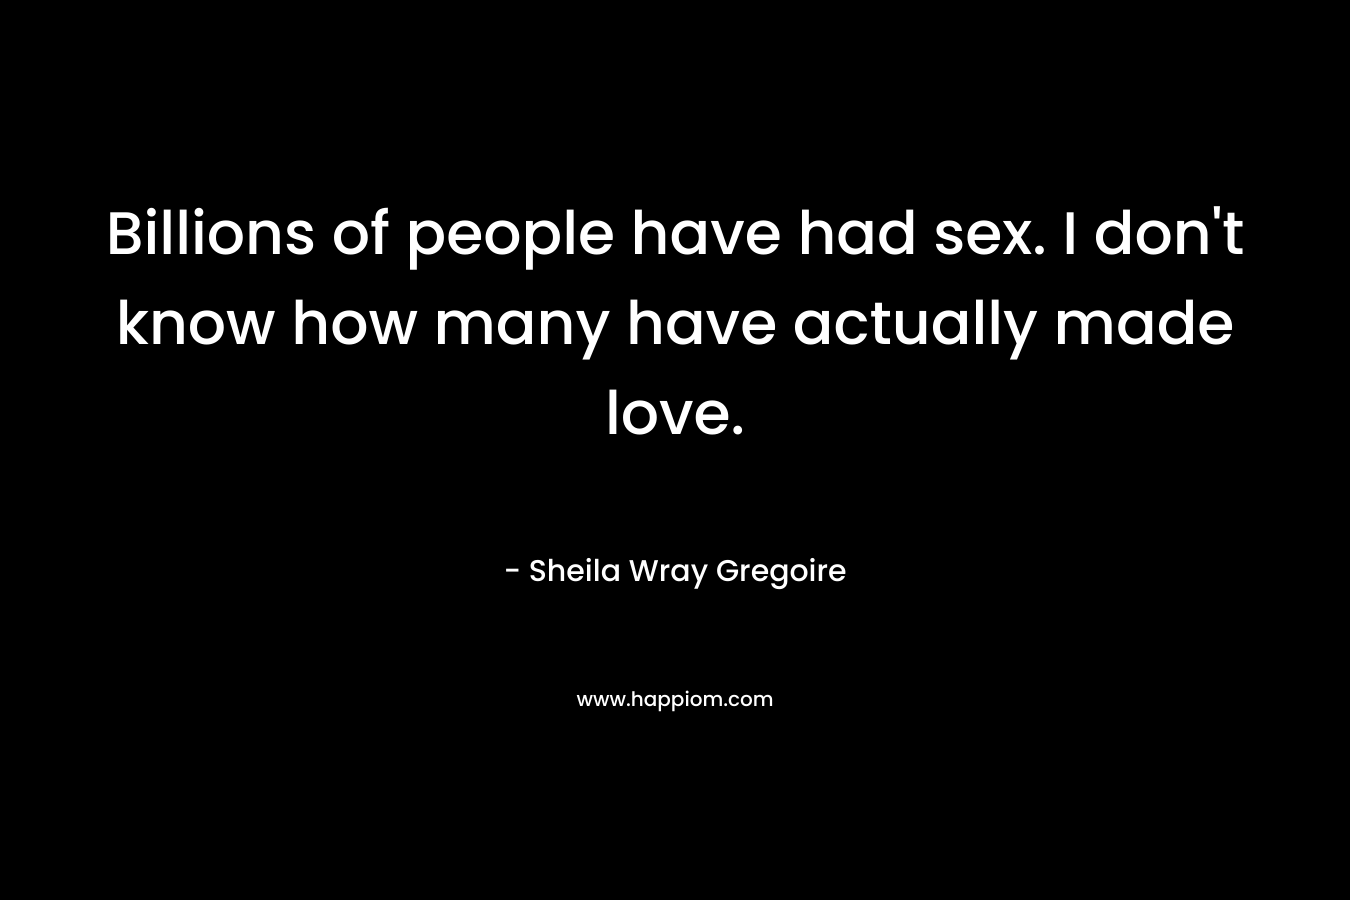 Billions of people have had sex. I don’t know how many have actually made love. – Sheila Wray Gregoire